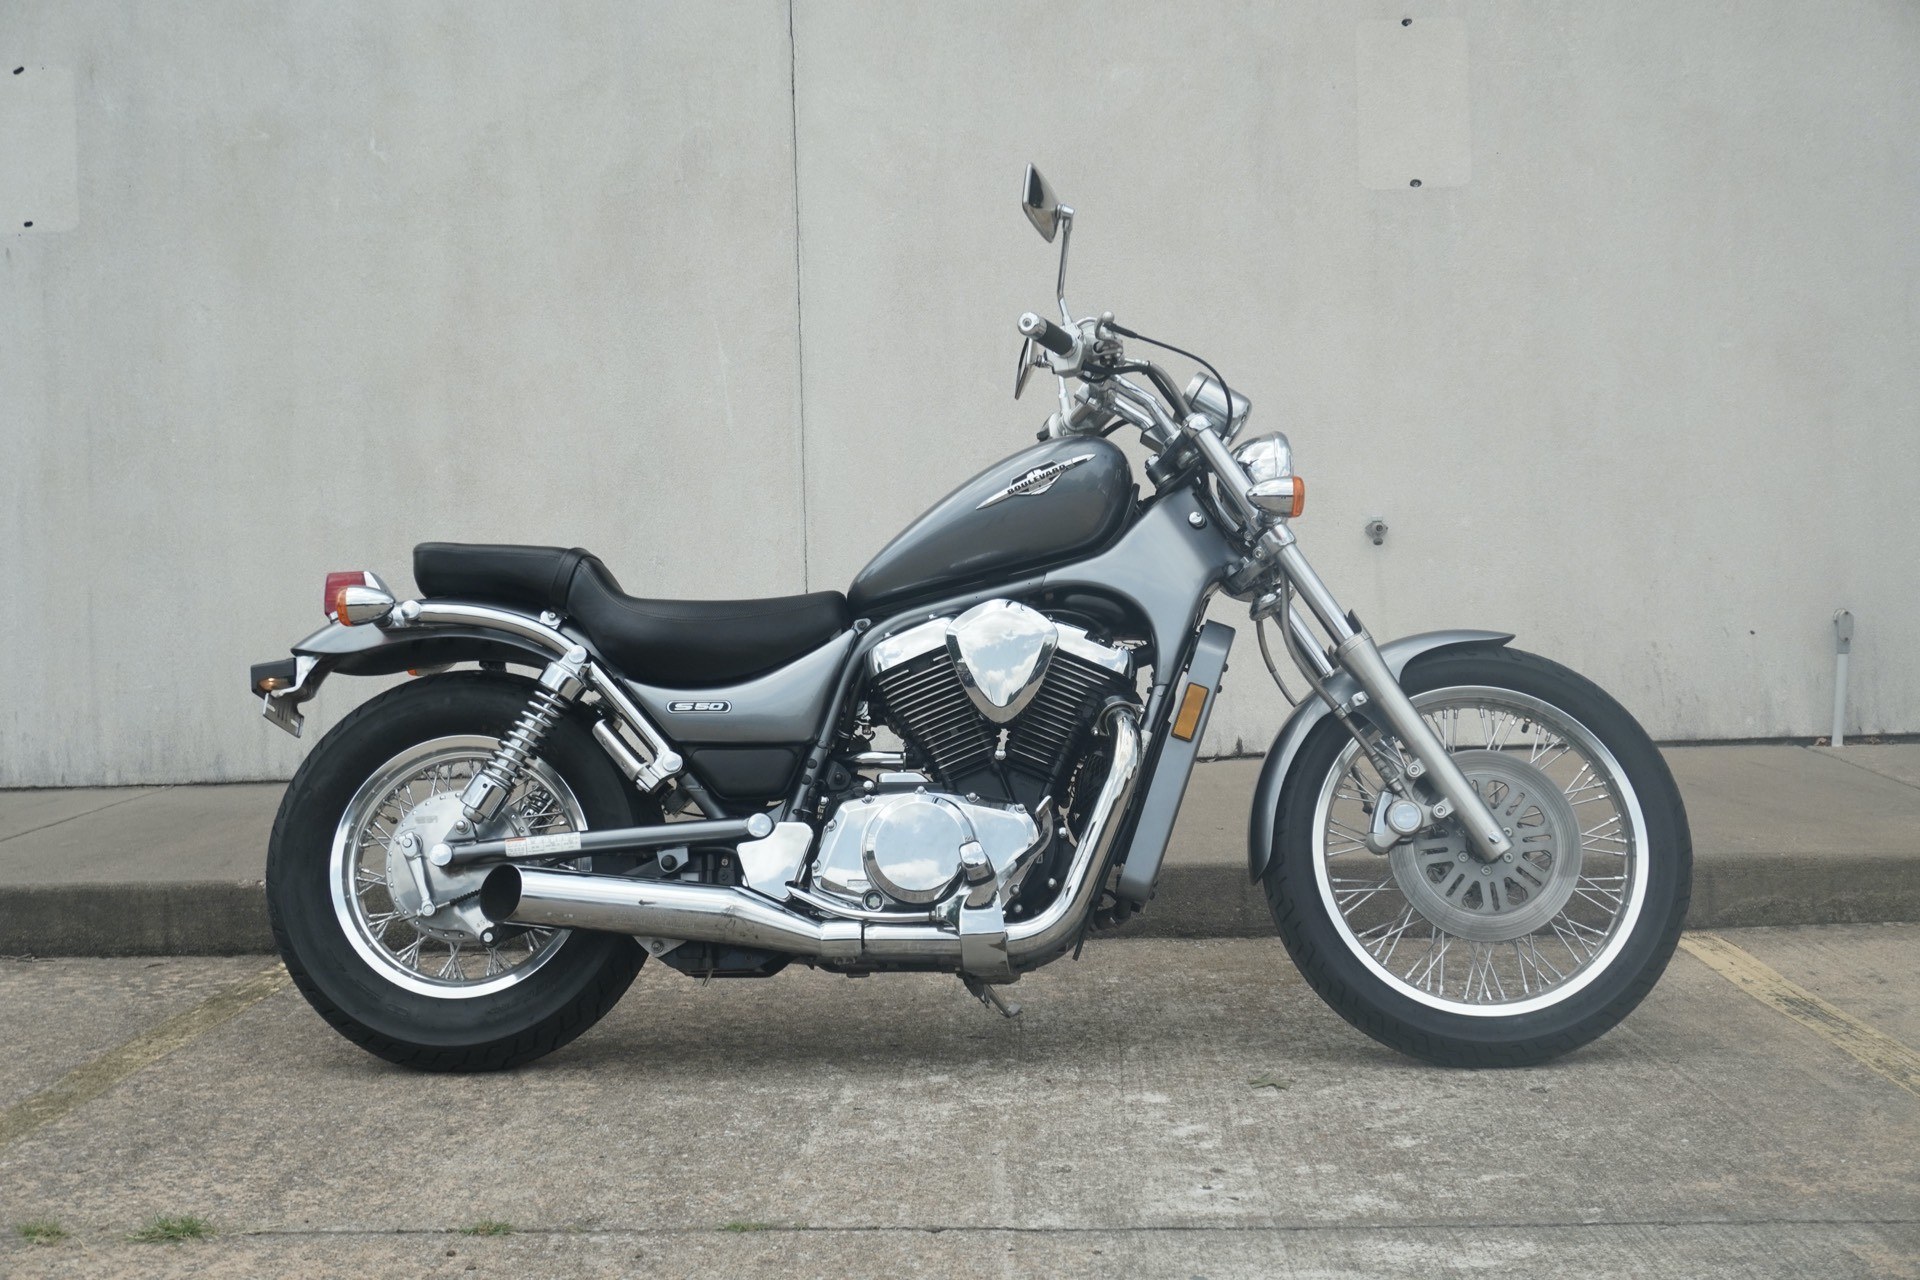 Used 2005 Suzuki Boulevard S50 Silver Motorcycles in